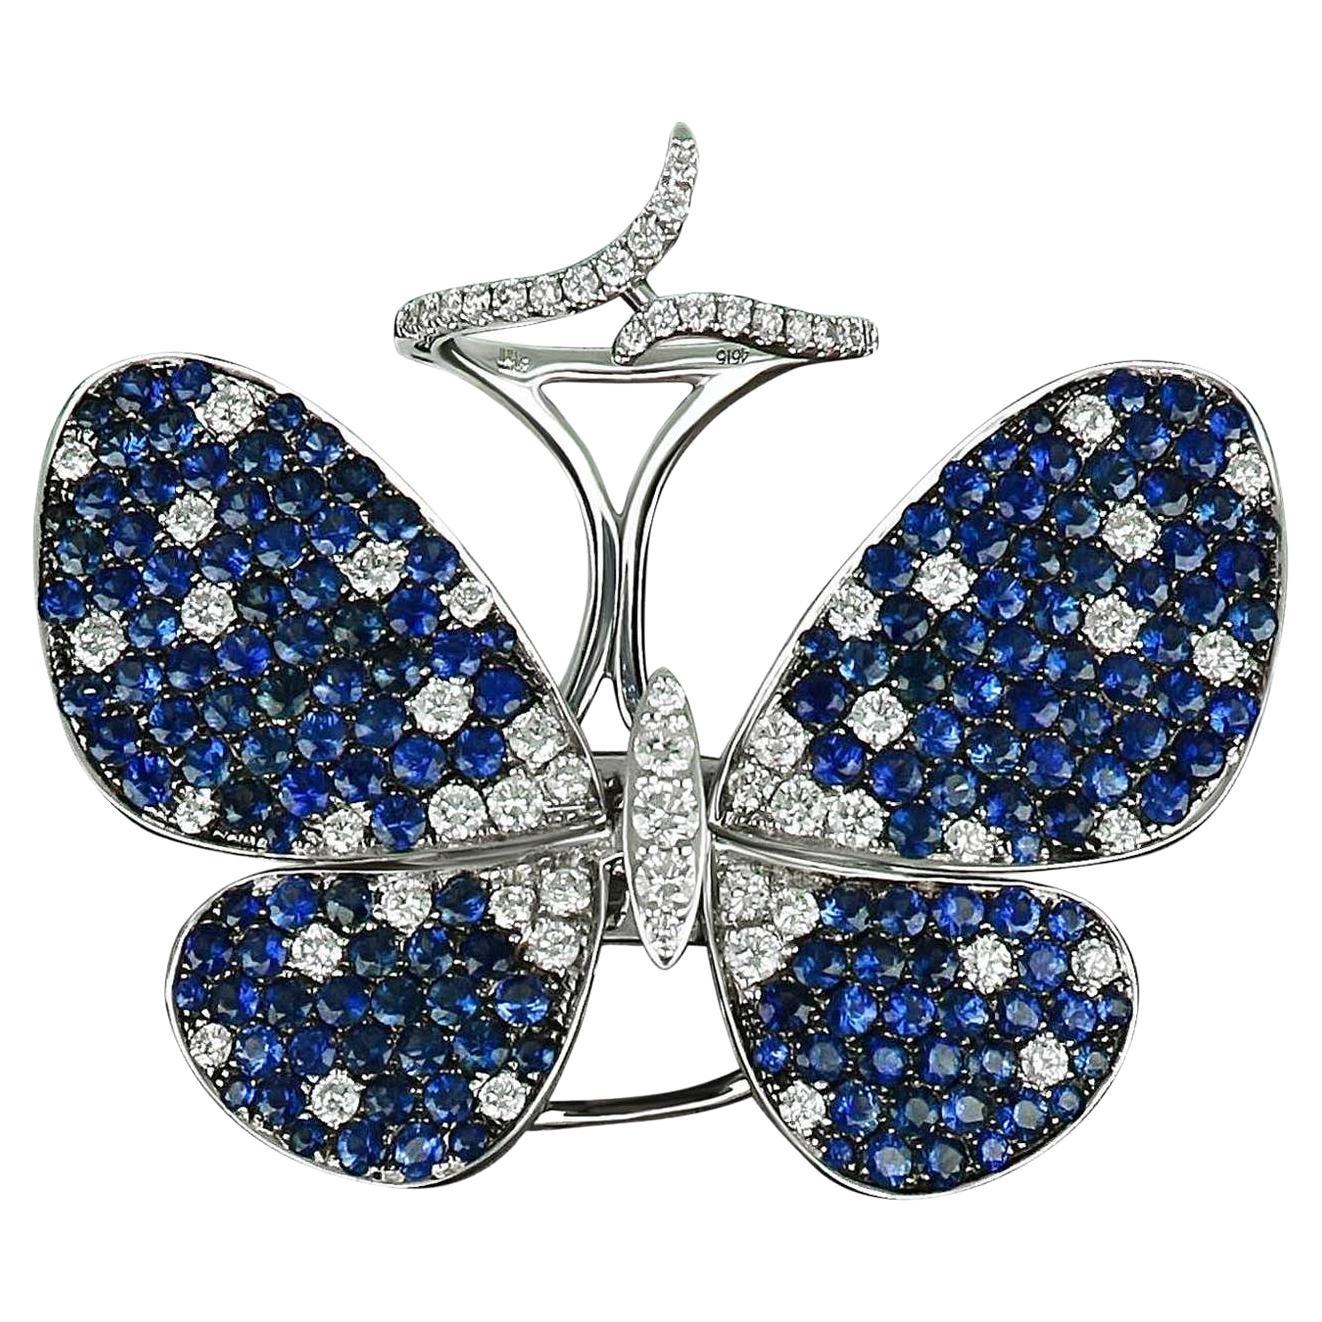 For Sale:  Amwaj 18 Karat White Gold Butterfly Ring with Sapphires and Diamonds